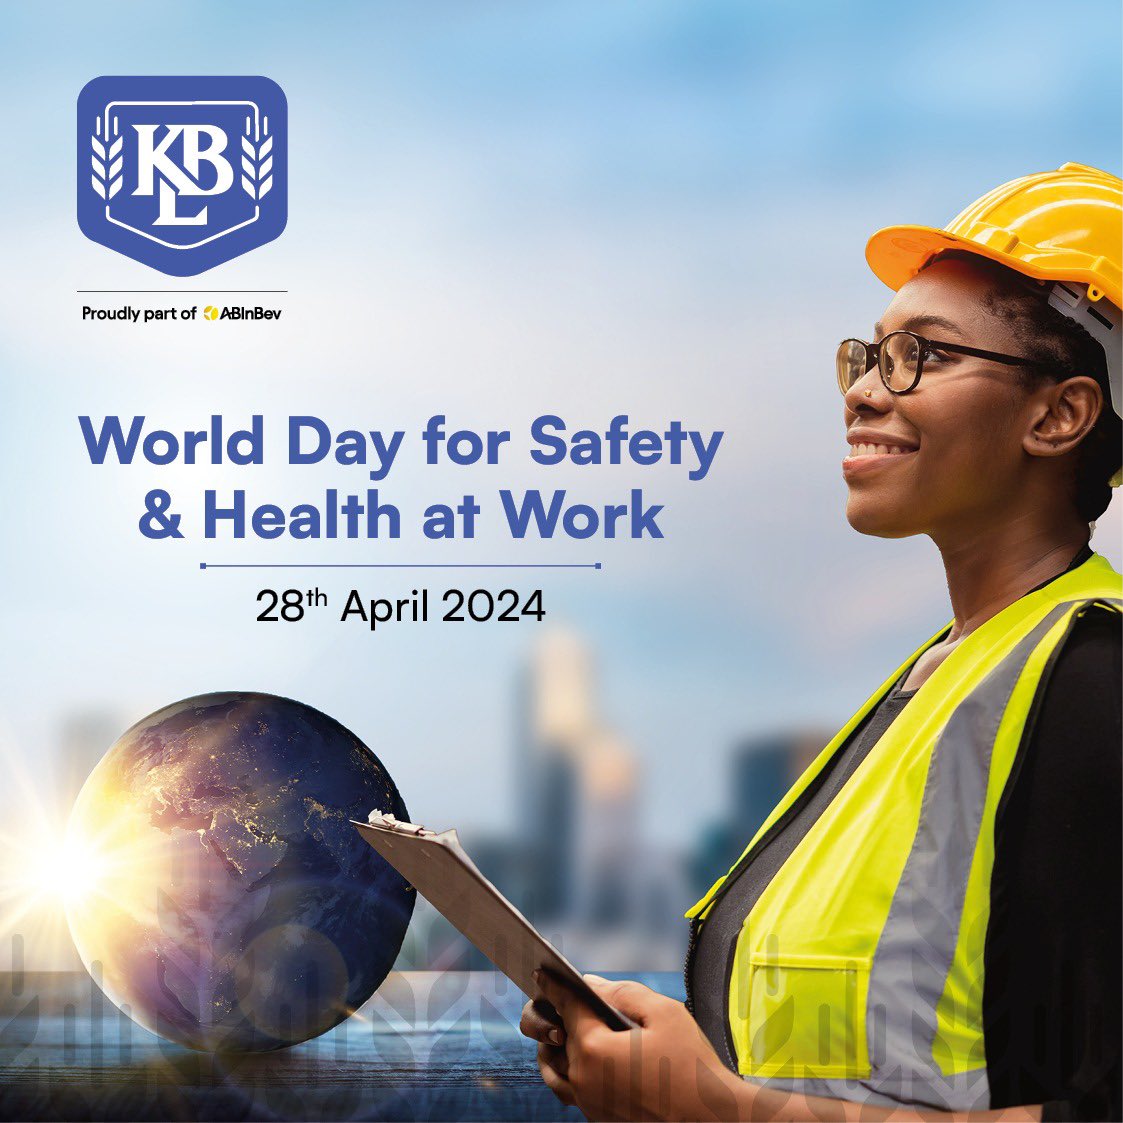 Happy World Day for Safety & Health at Work from KBL! 
Ensuring the well-being of our employees is at the core of everything we do. Let's prioritize safety together.

#WorldWHSDay2024 #FutureWithMoreCheers